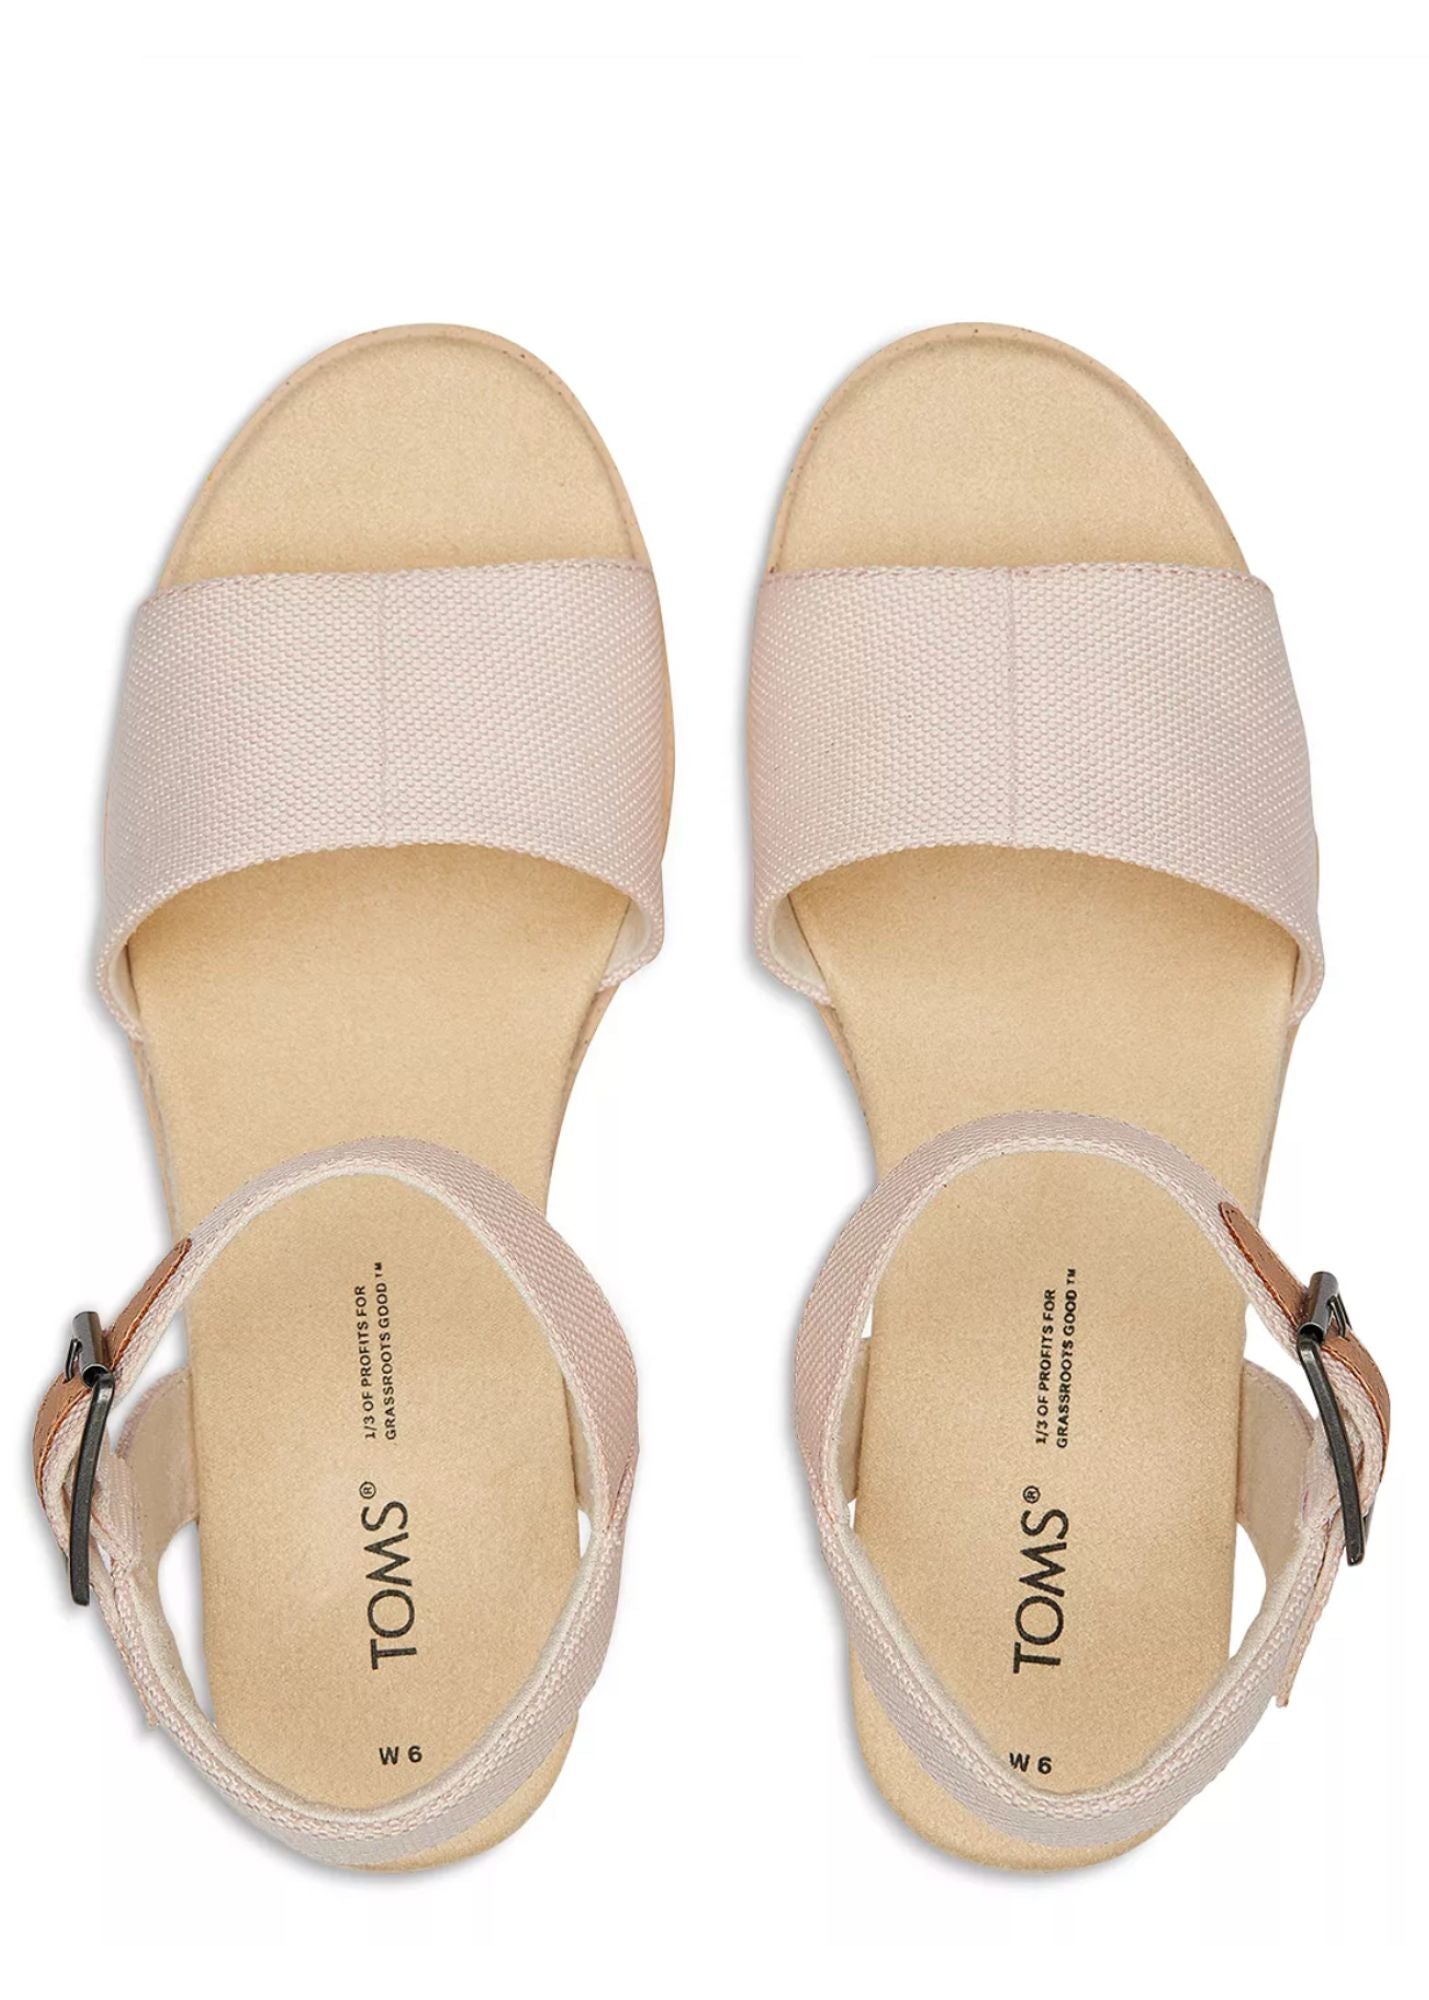 TOMS® Diana Pink Wedge Sandal - FINAL SALE Shoes